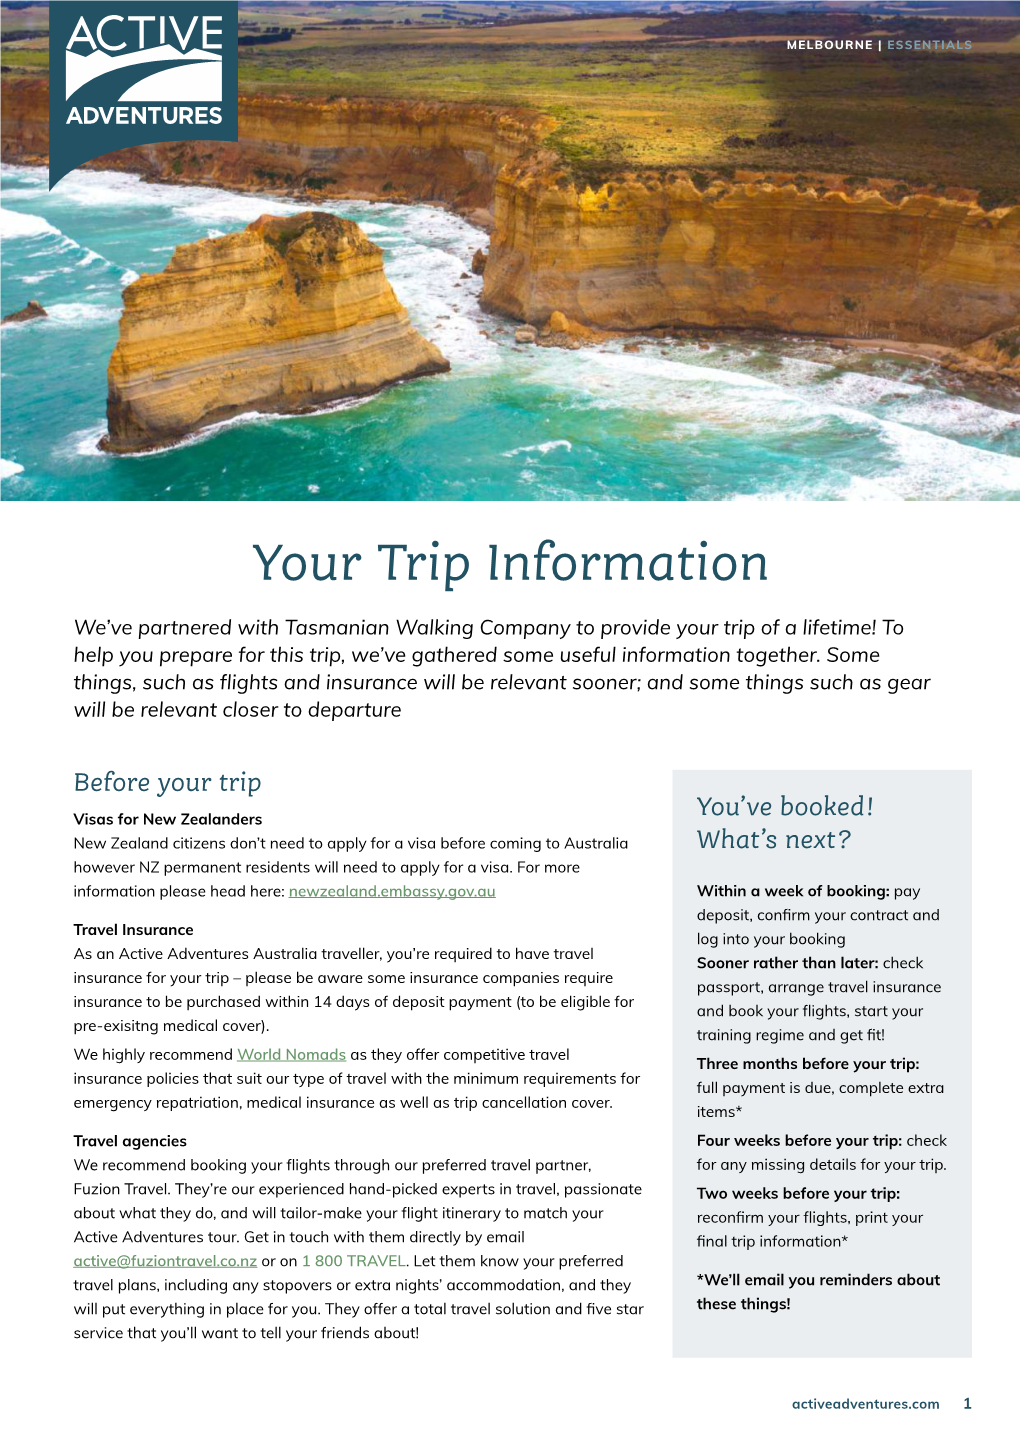 Your Trip Information